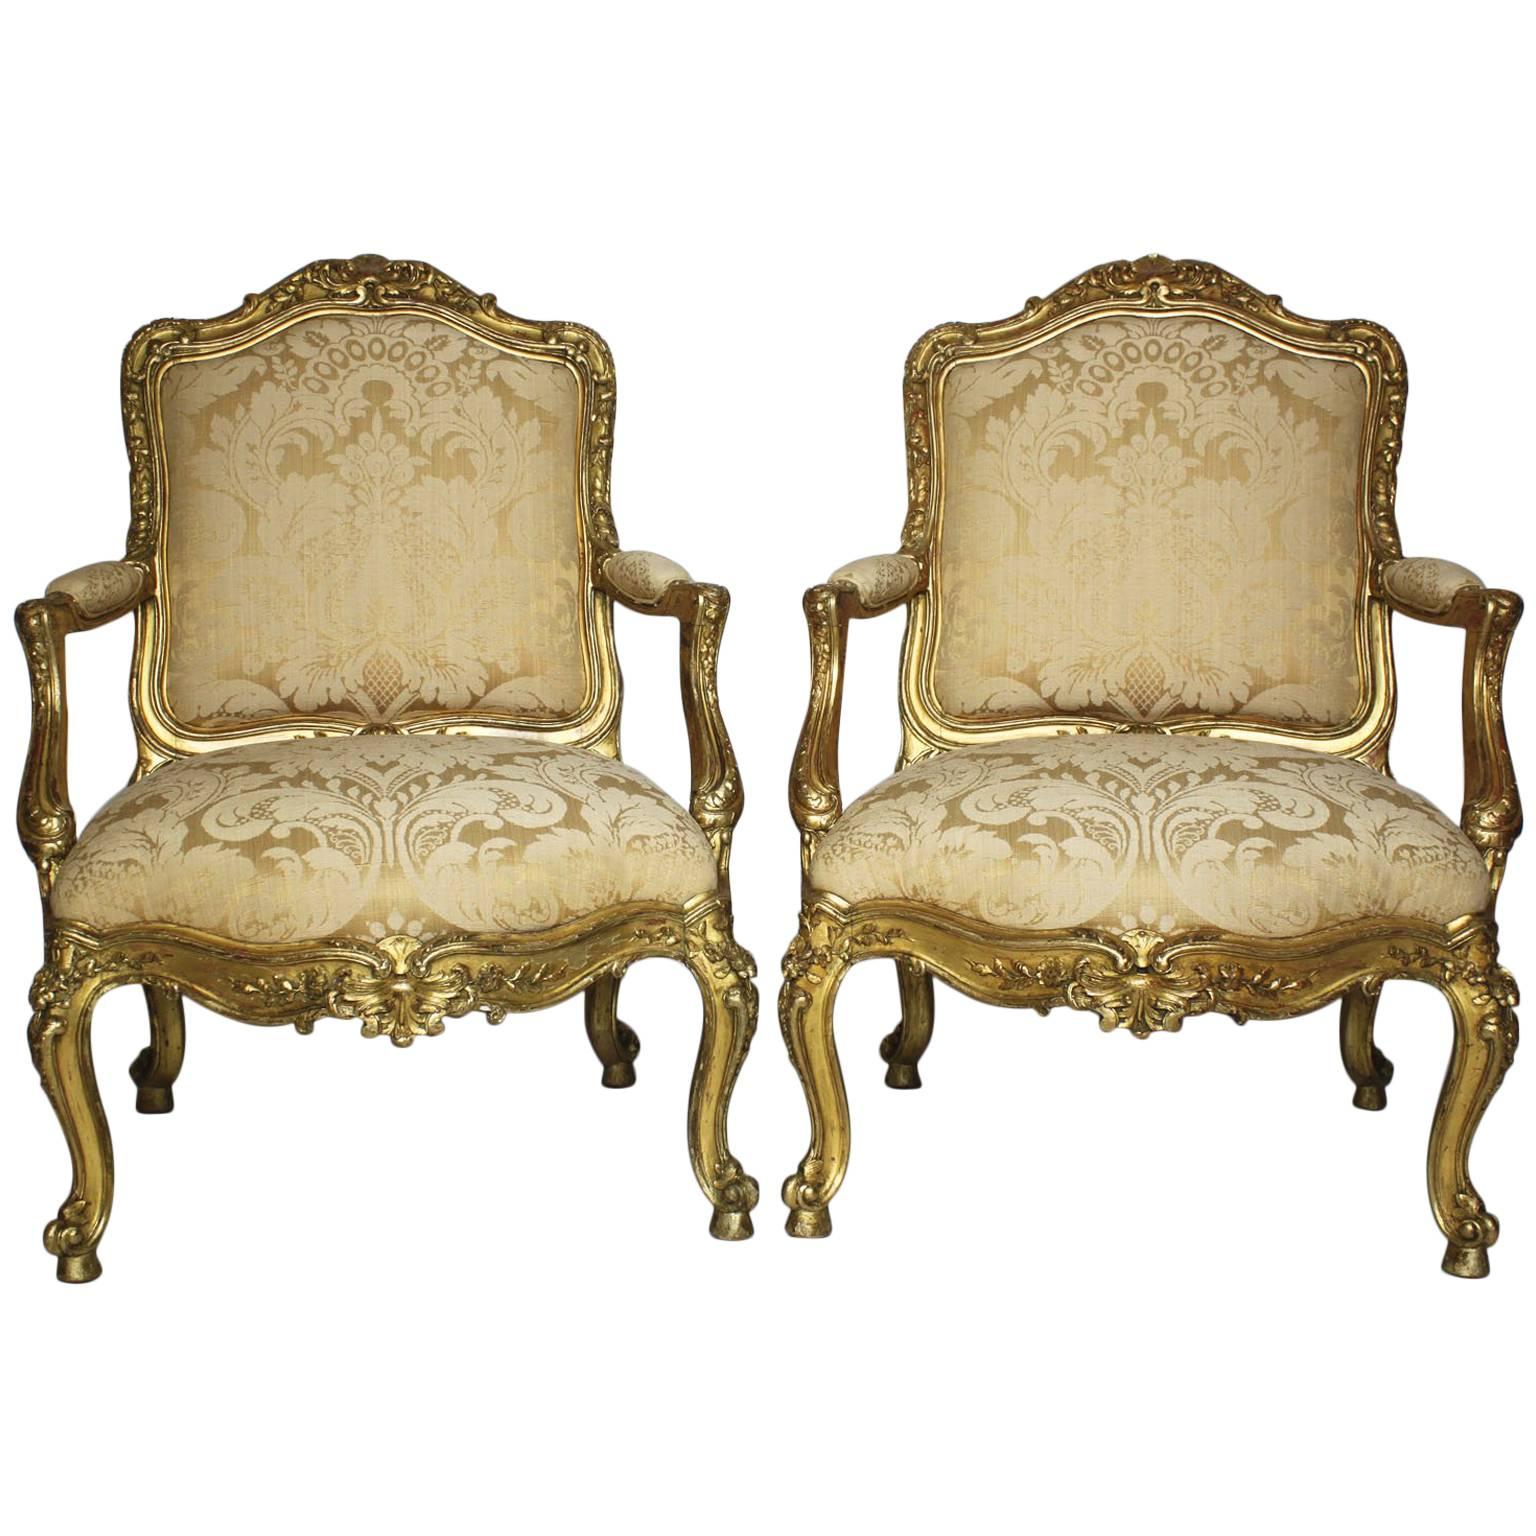 Pair of Italian 19th Century Rococo Style Giltwood Carved Armchairs, circa 1860 For Sale